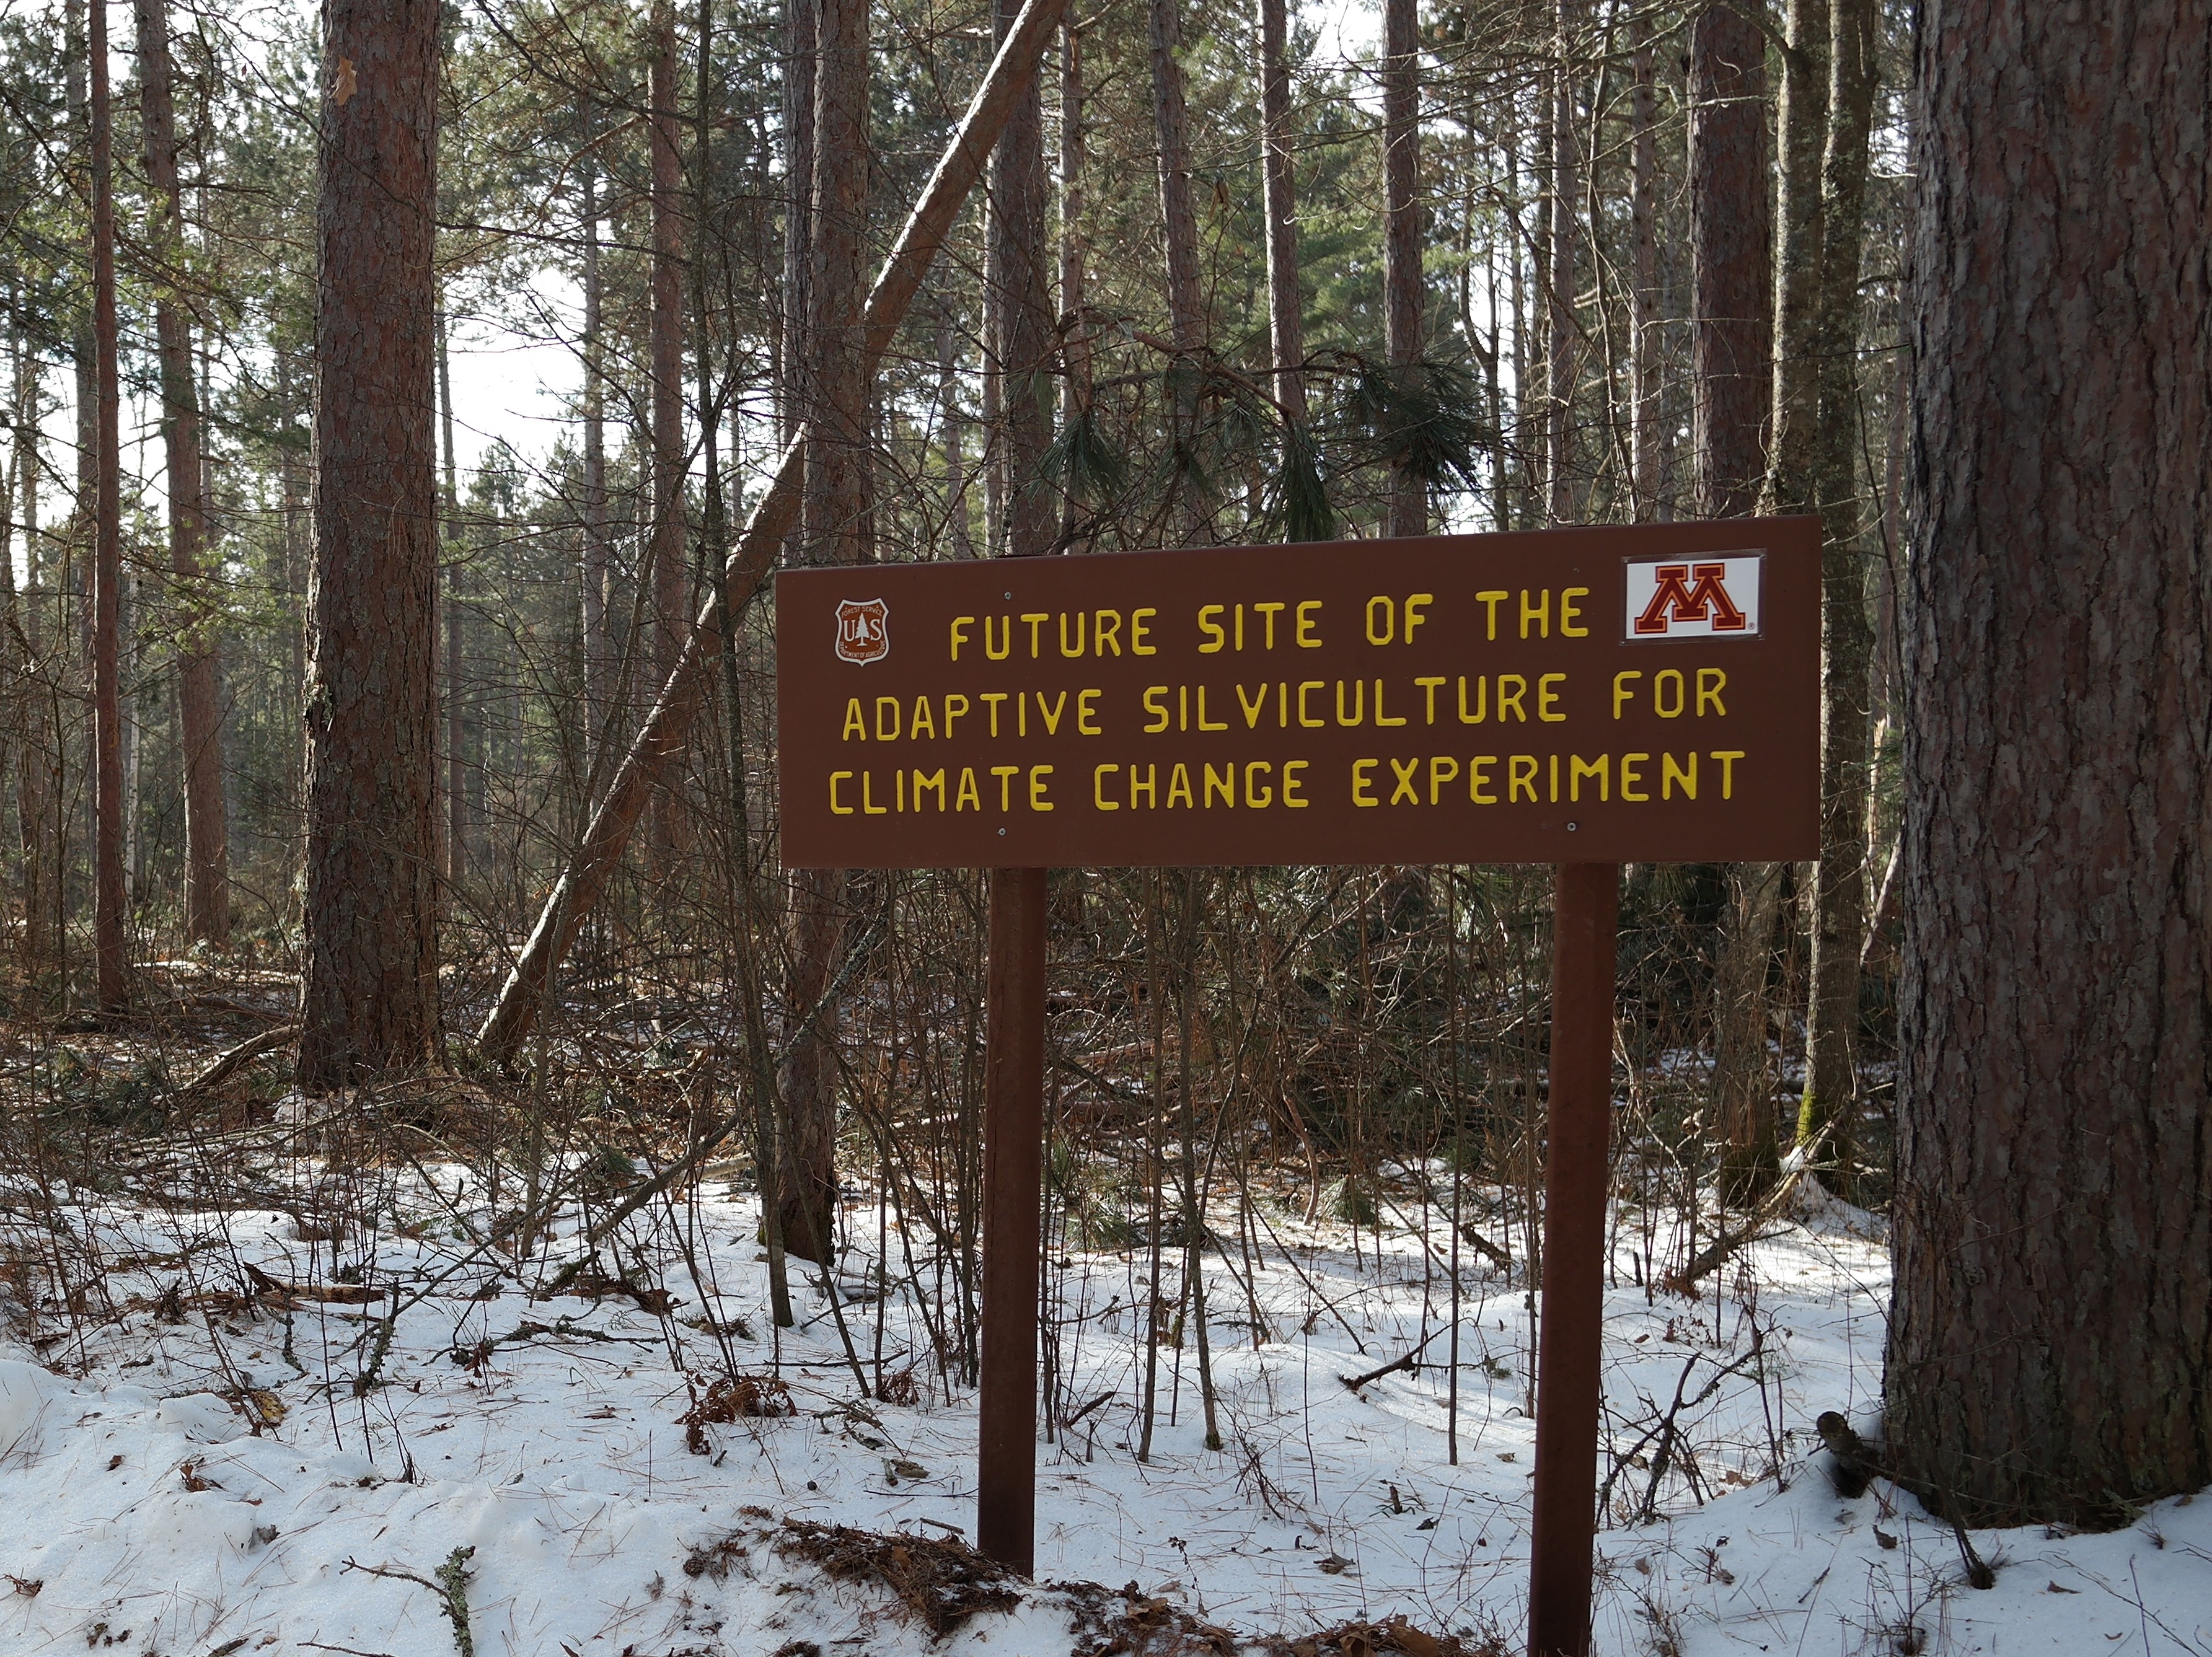 The Adaptive Silvicultre for Climate Change Project at the Chippewa National Forest, Minnesota, USA. Photo: Josh Kragthorpe.